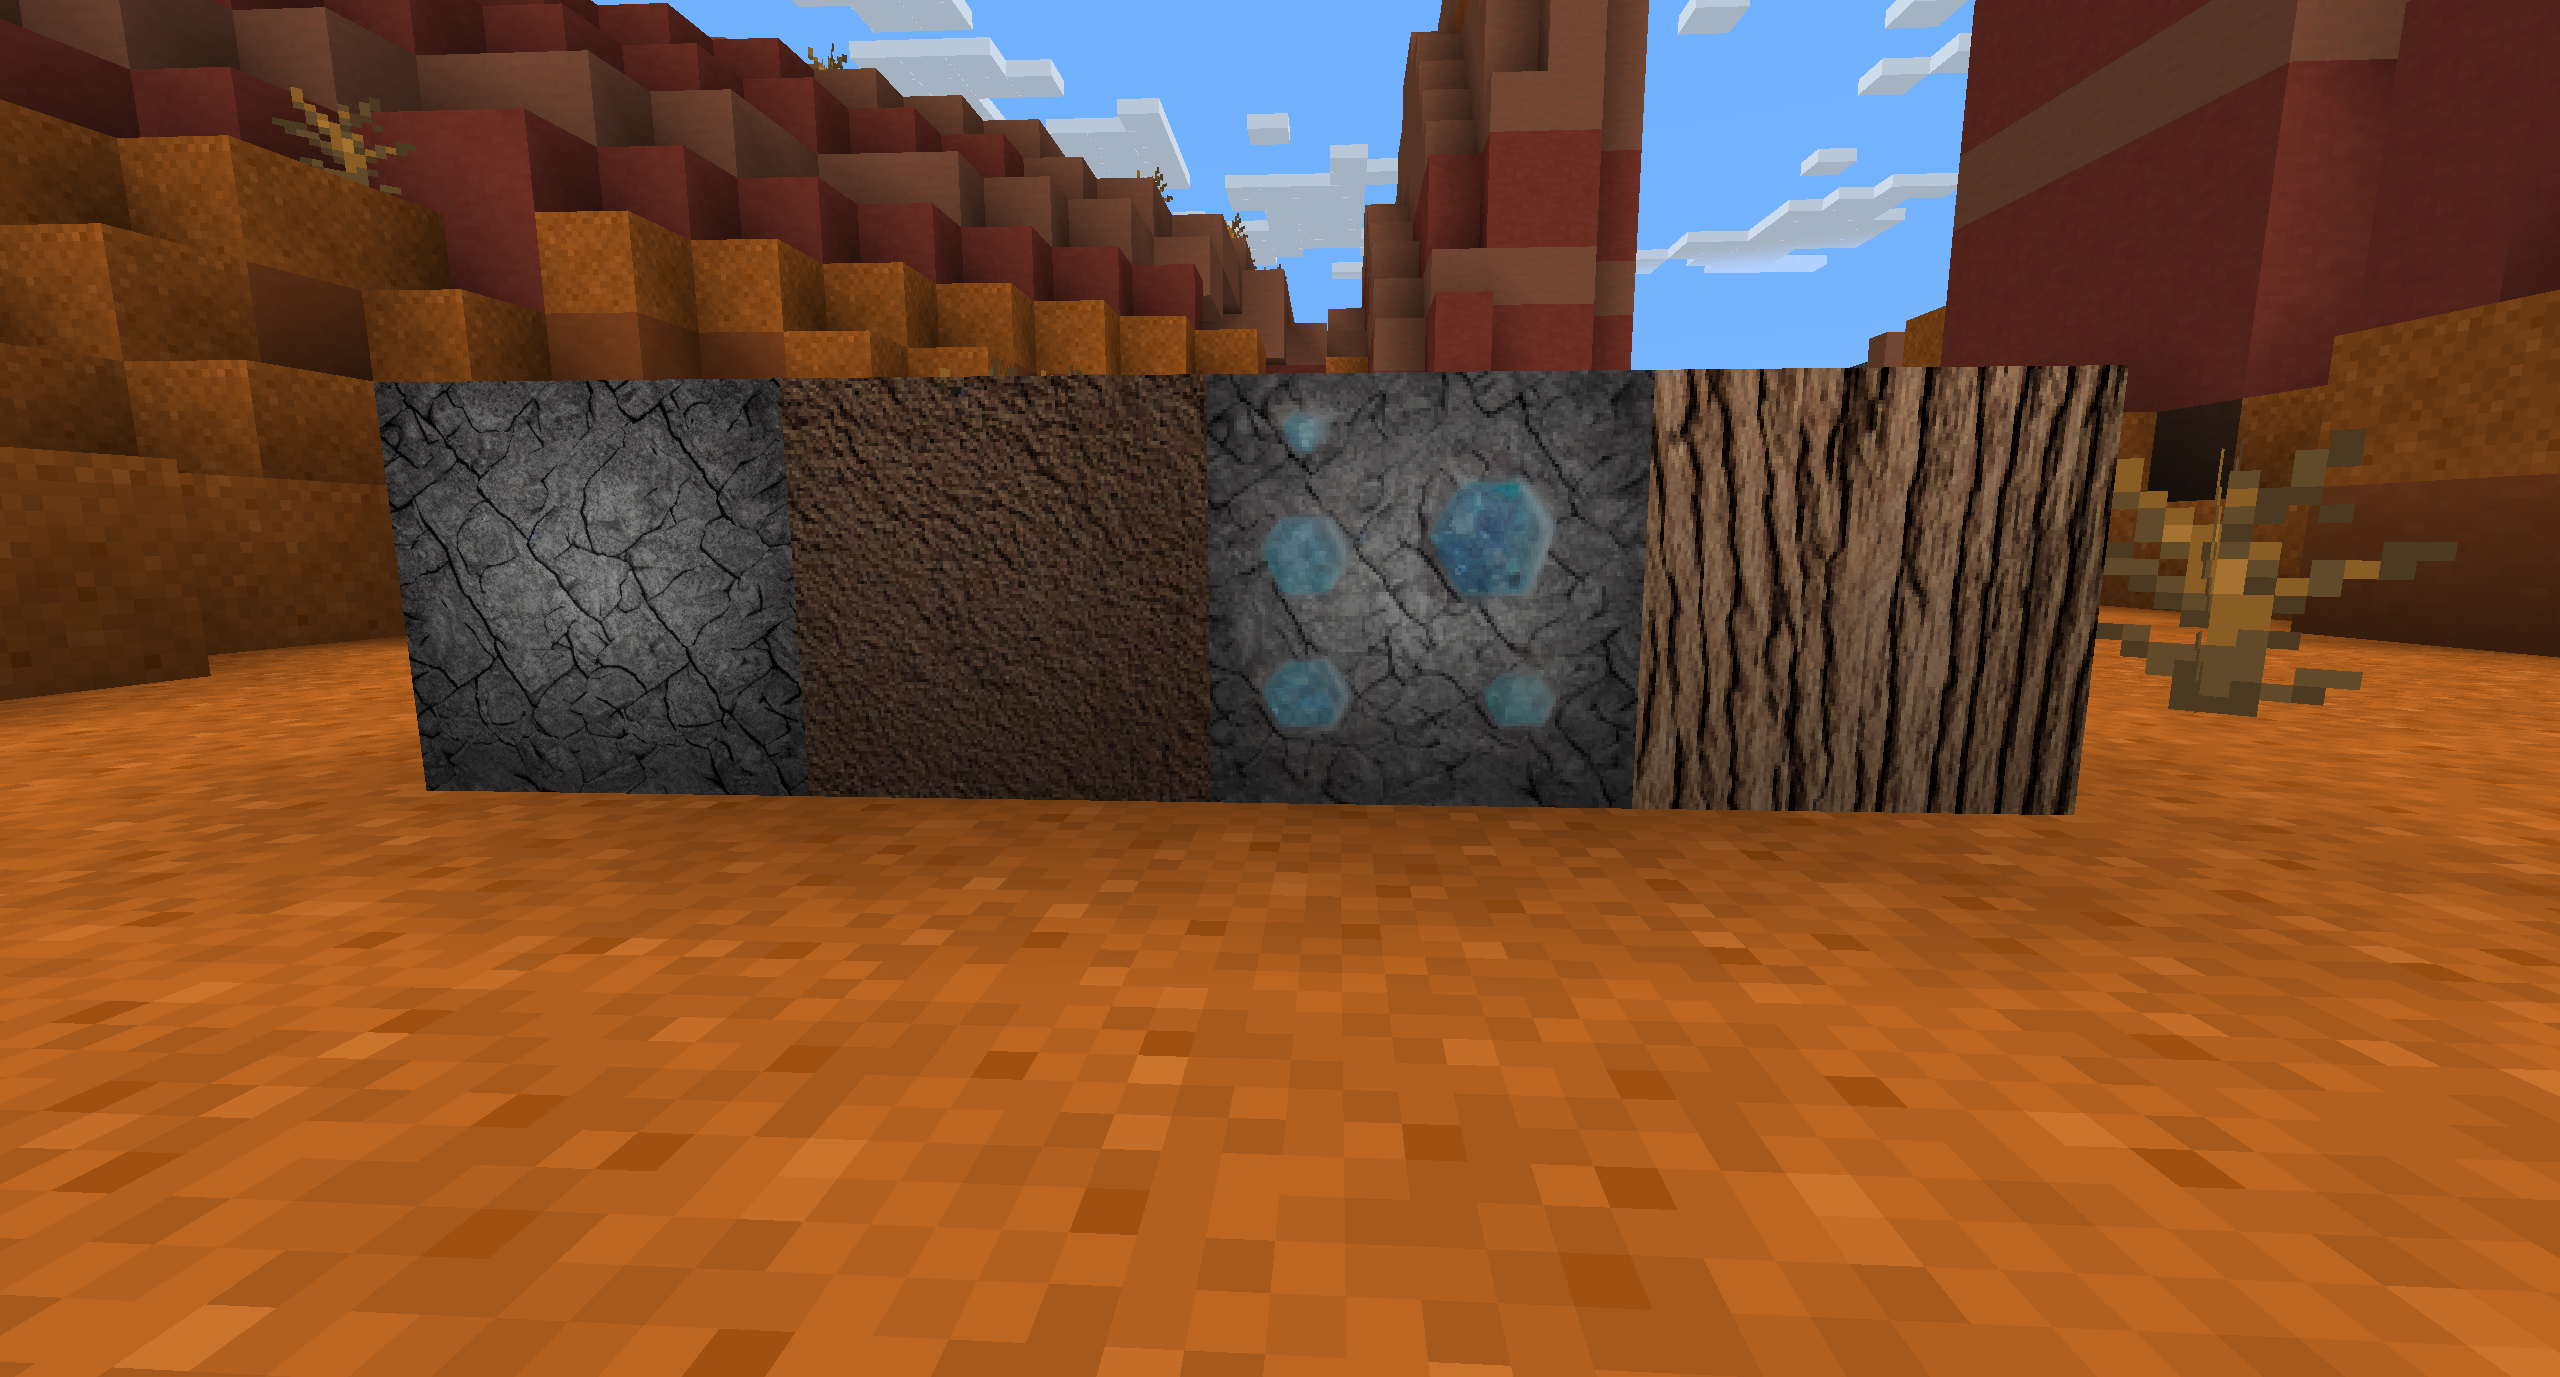 Our textures displayed in Minecraft. From left to right: Stone, Dirt, Diamond Ore, Oak. 